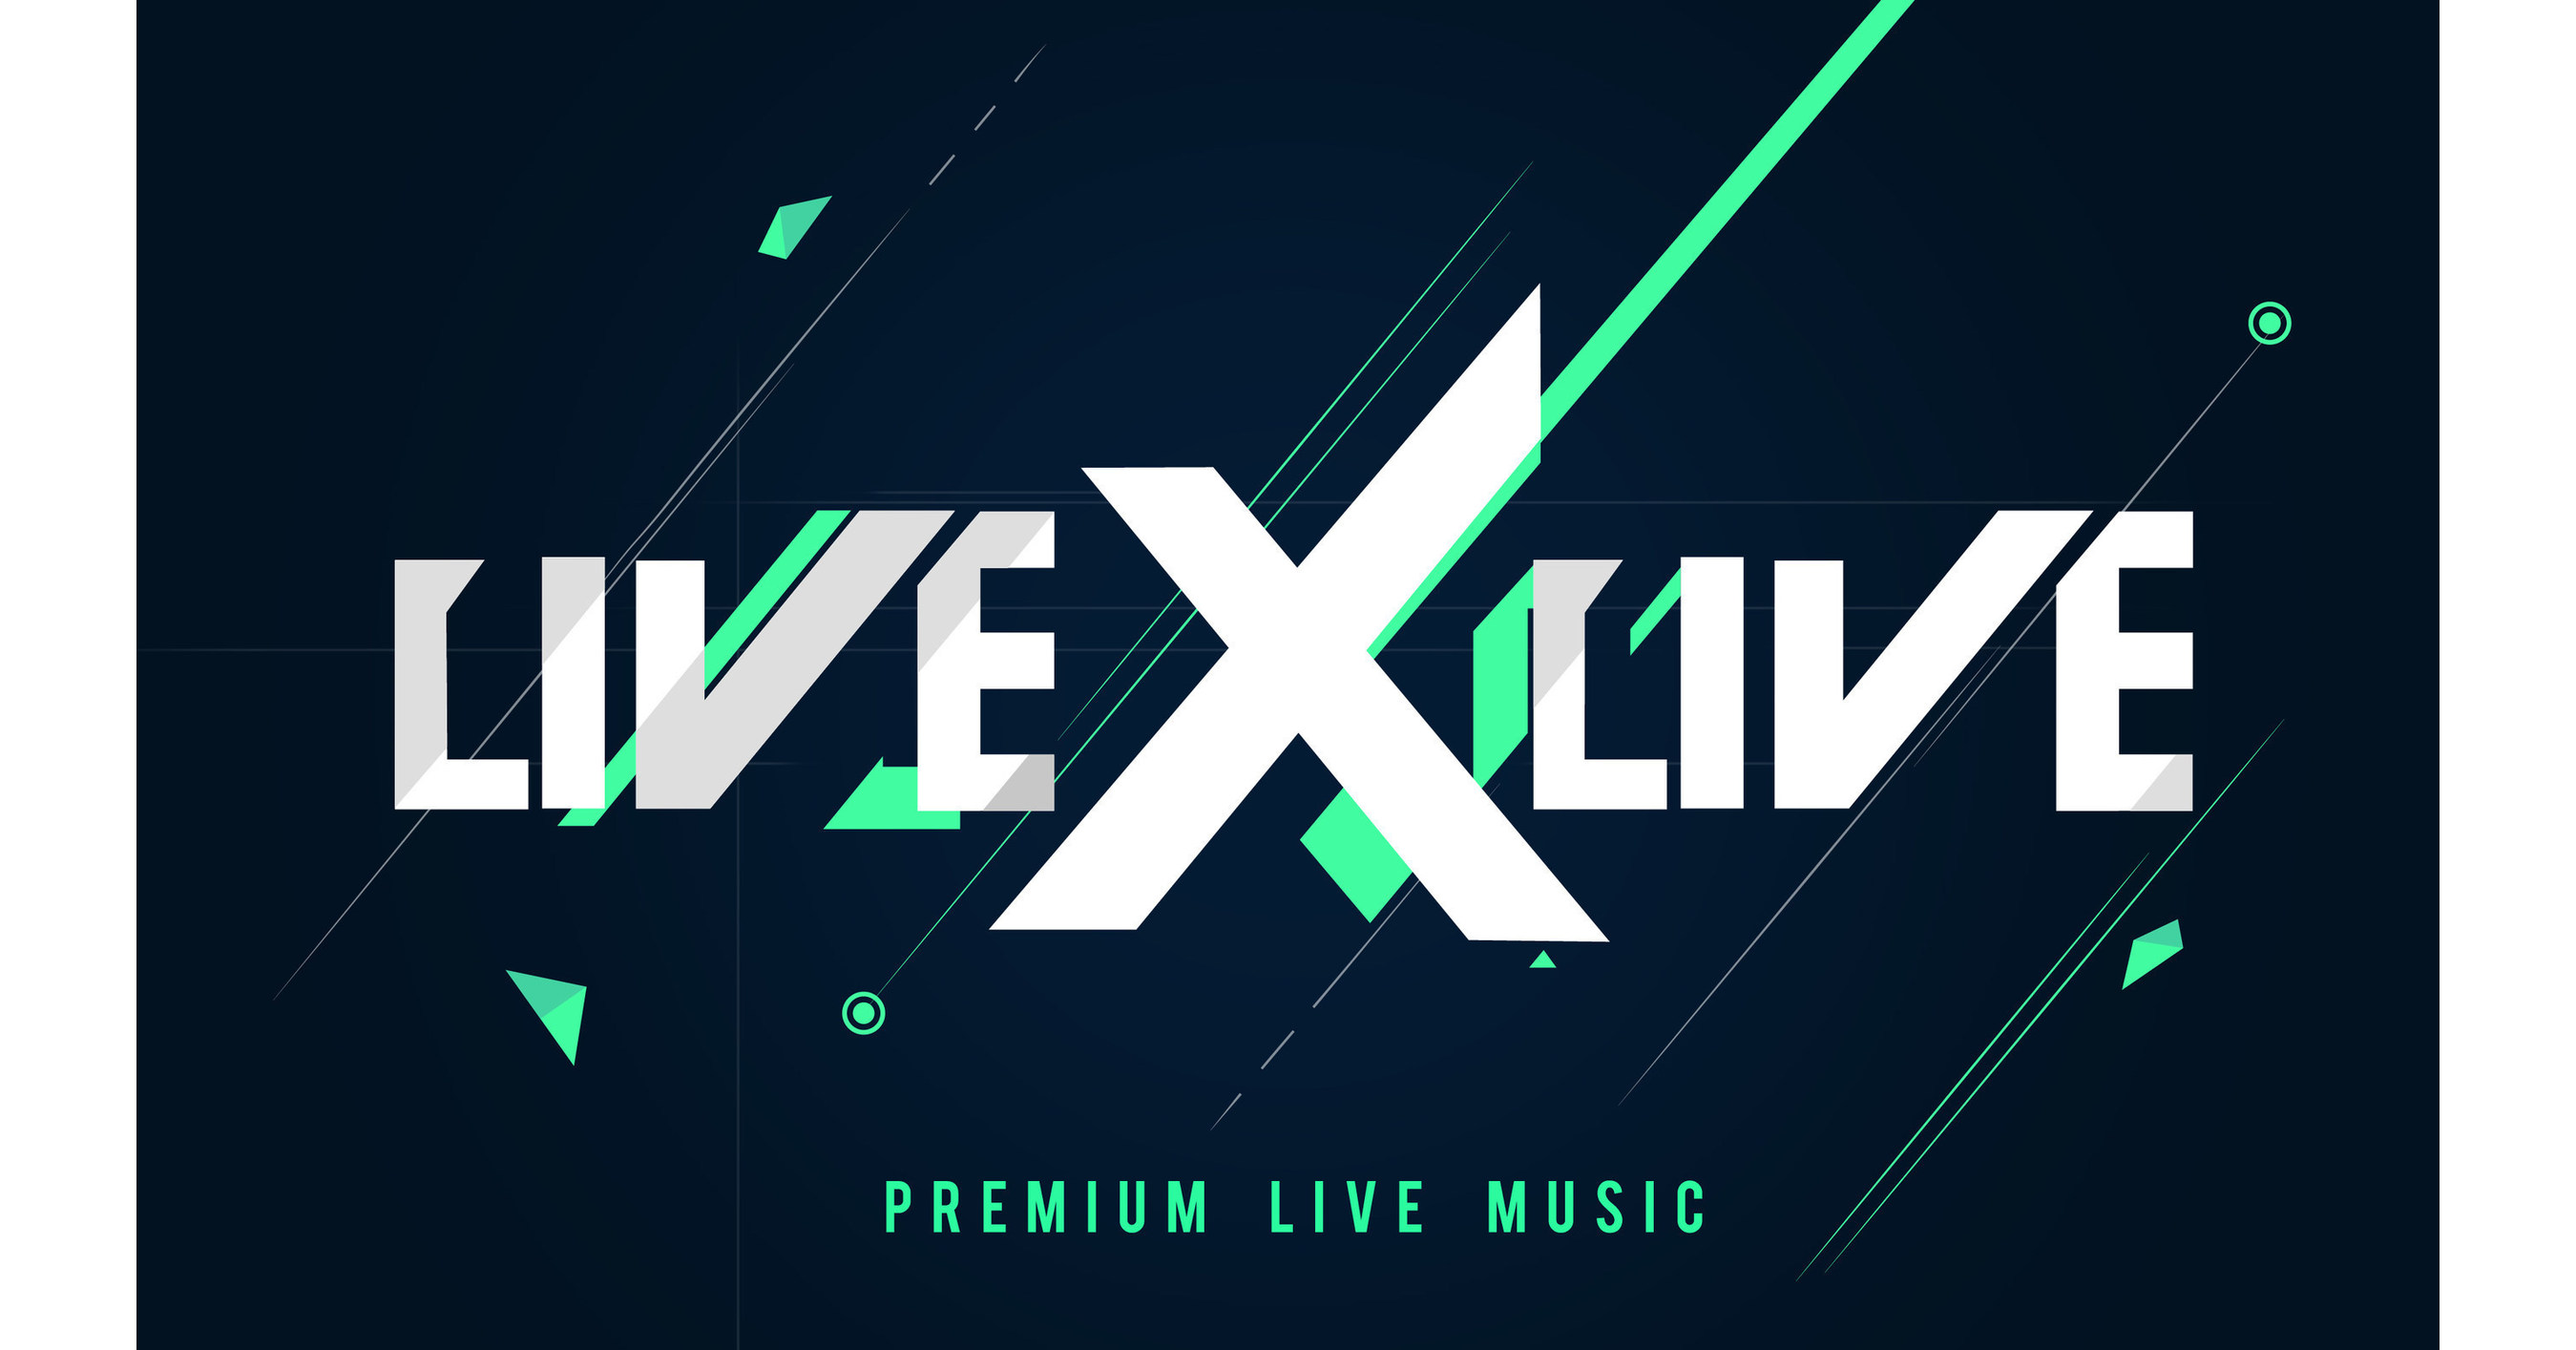 LiveXLive Financials Q1 2019 – Strong Subscriber Growth But Struggling on the Bottomline